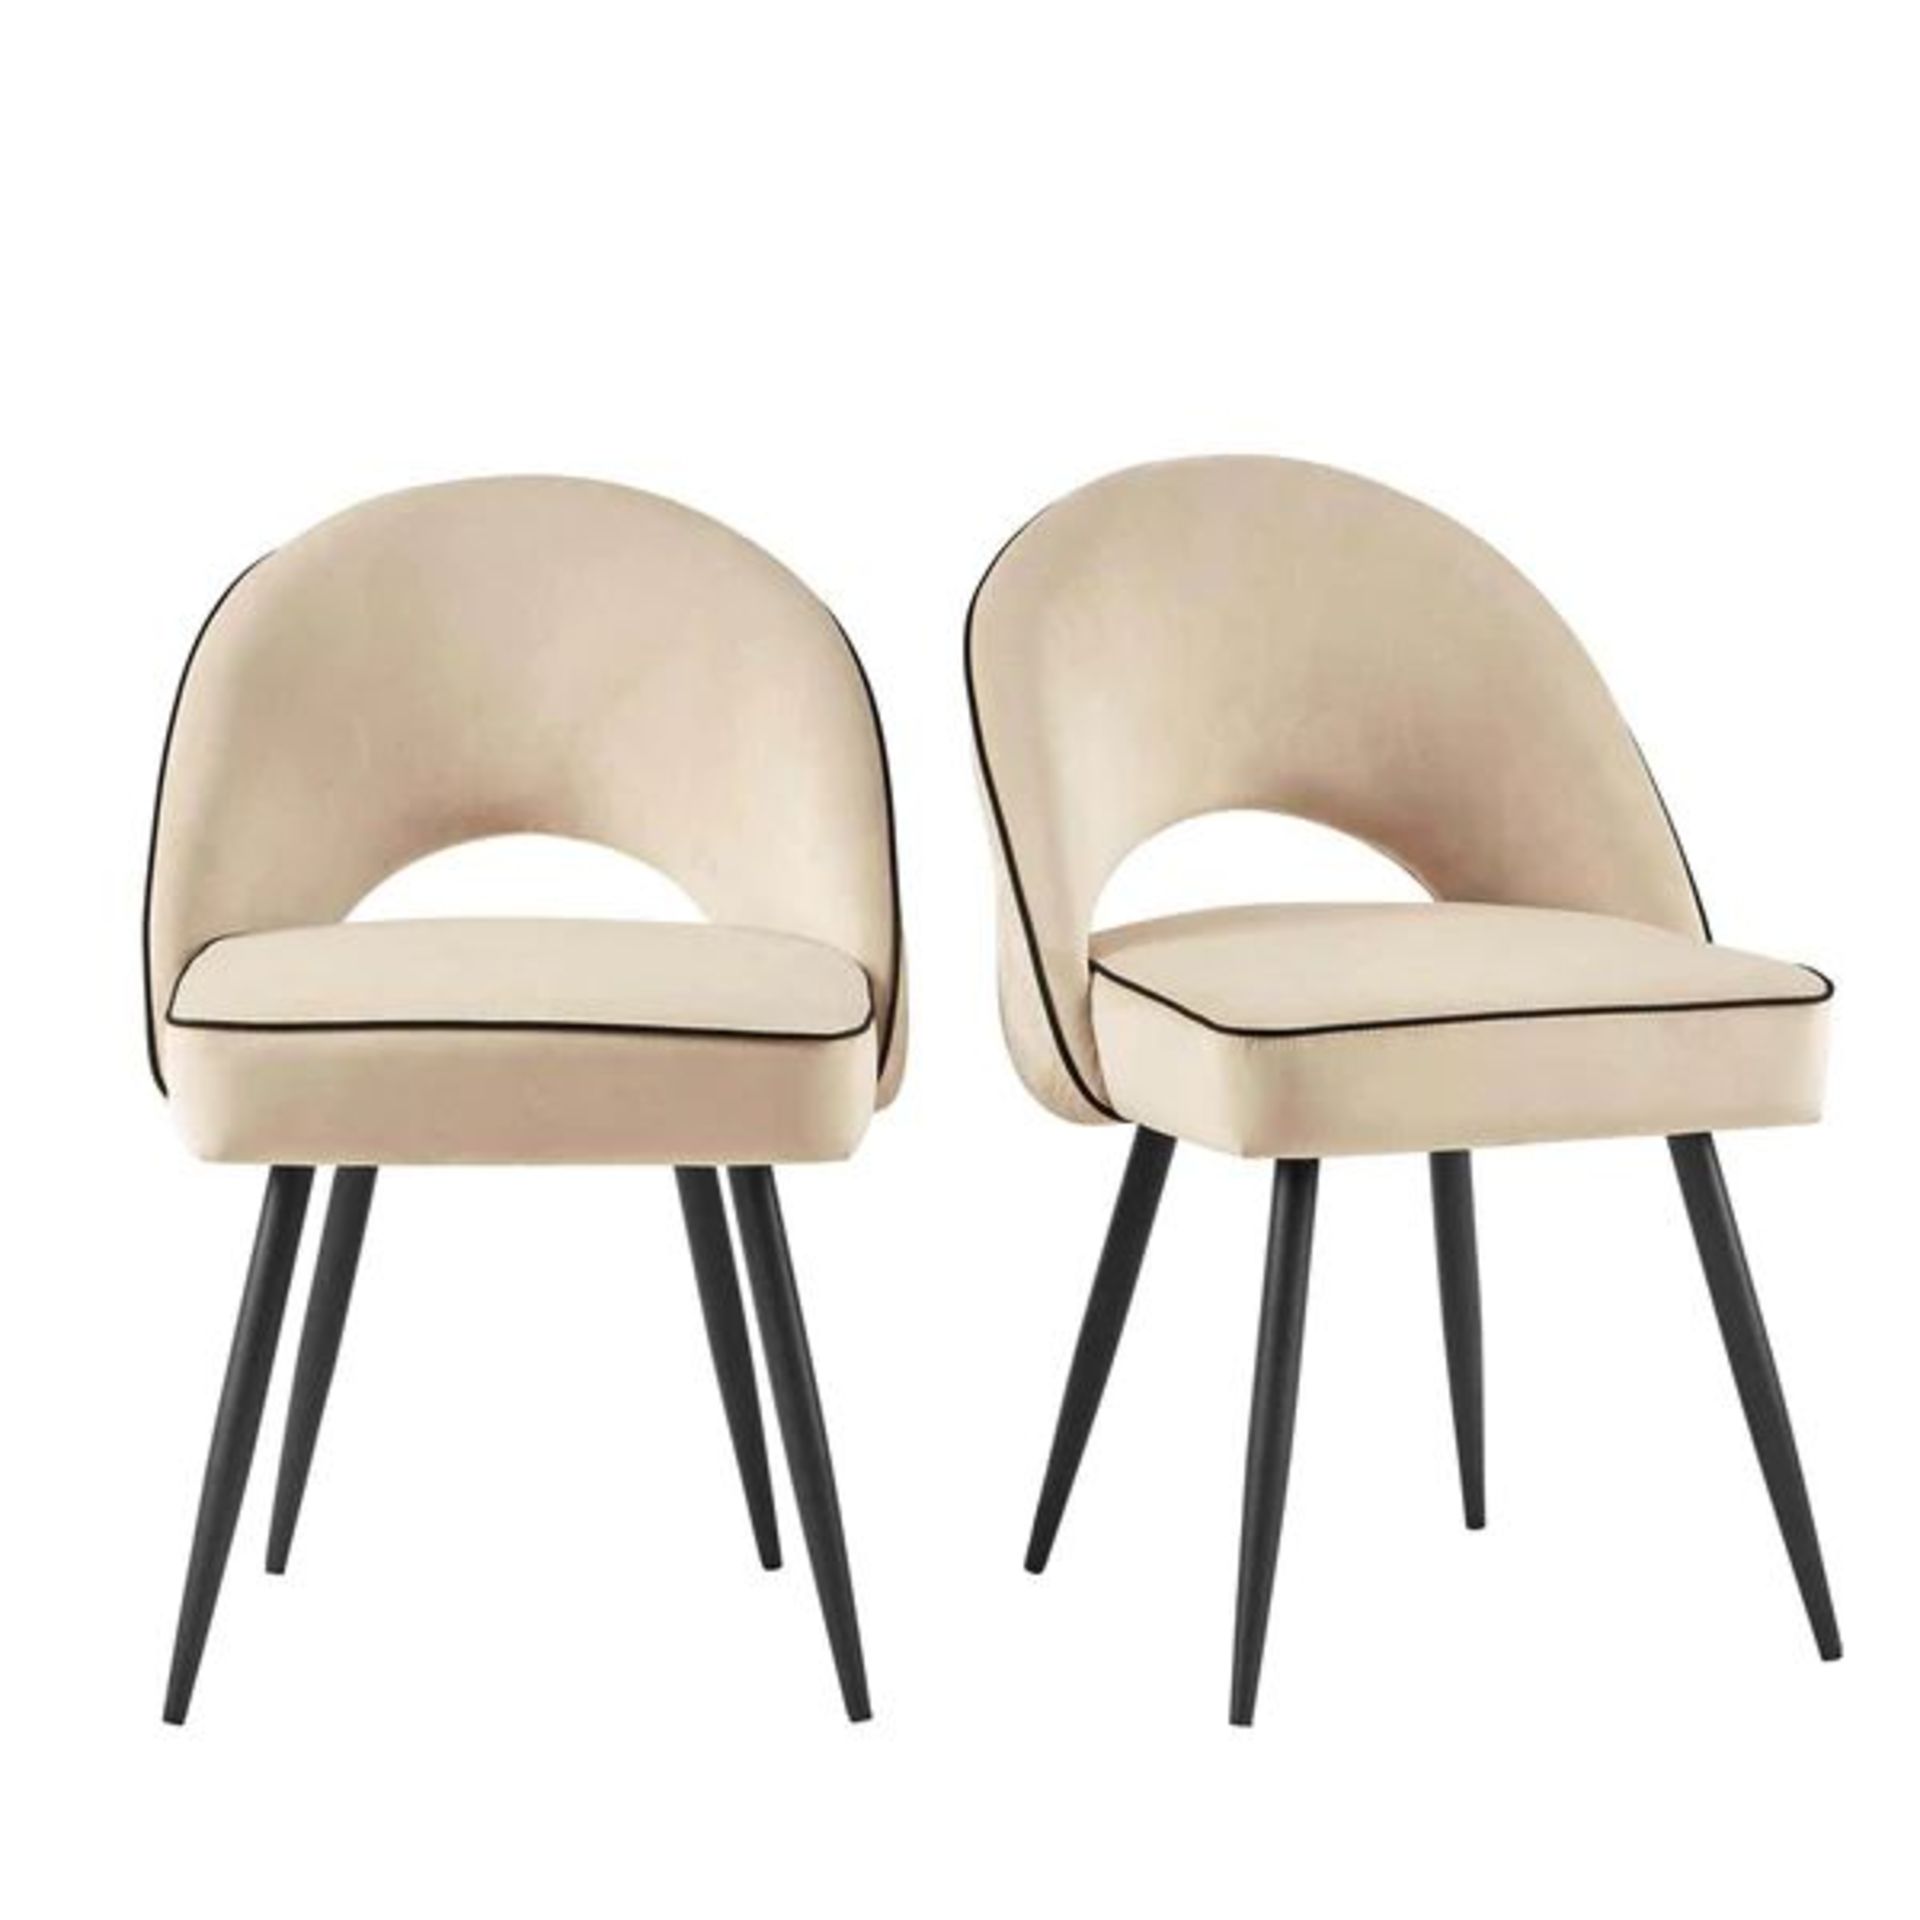 Oakley Set of 2 Champagne Velvet Upholstered Dining Chairs with Contrast Piping. - R14. RRP £269.99. - Image 2 of 2